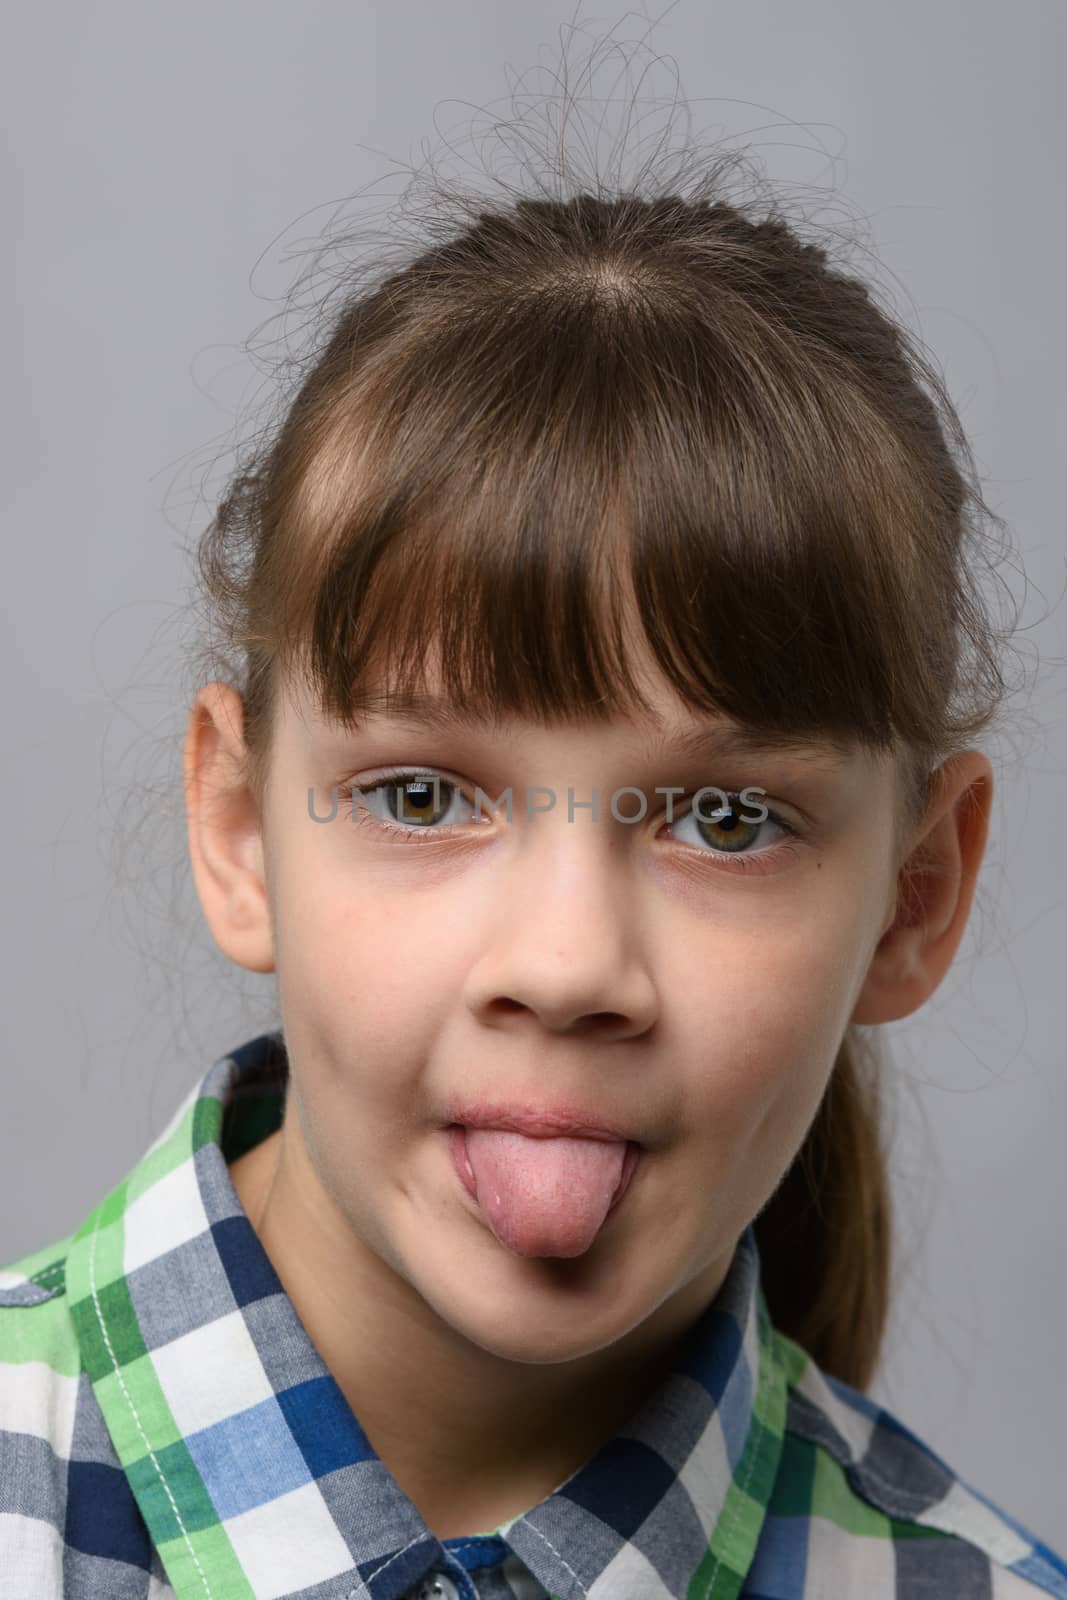 Portrait of a ten-year-old girl showing tongue, European appearance, close-up